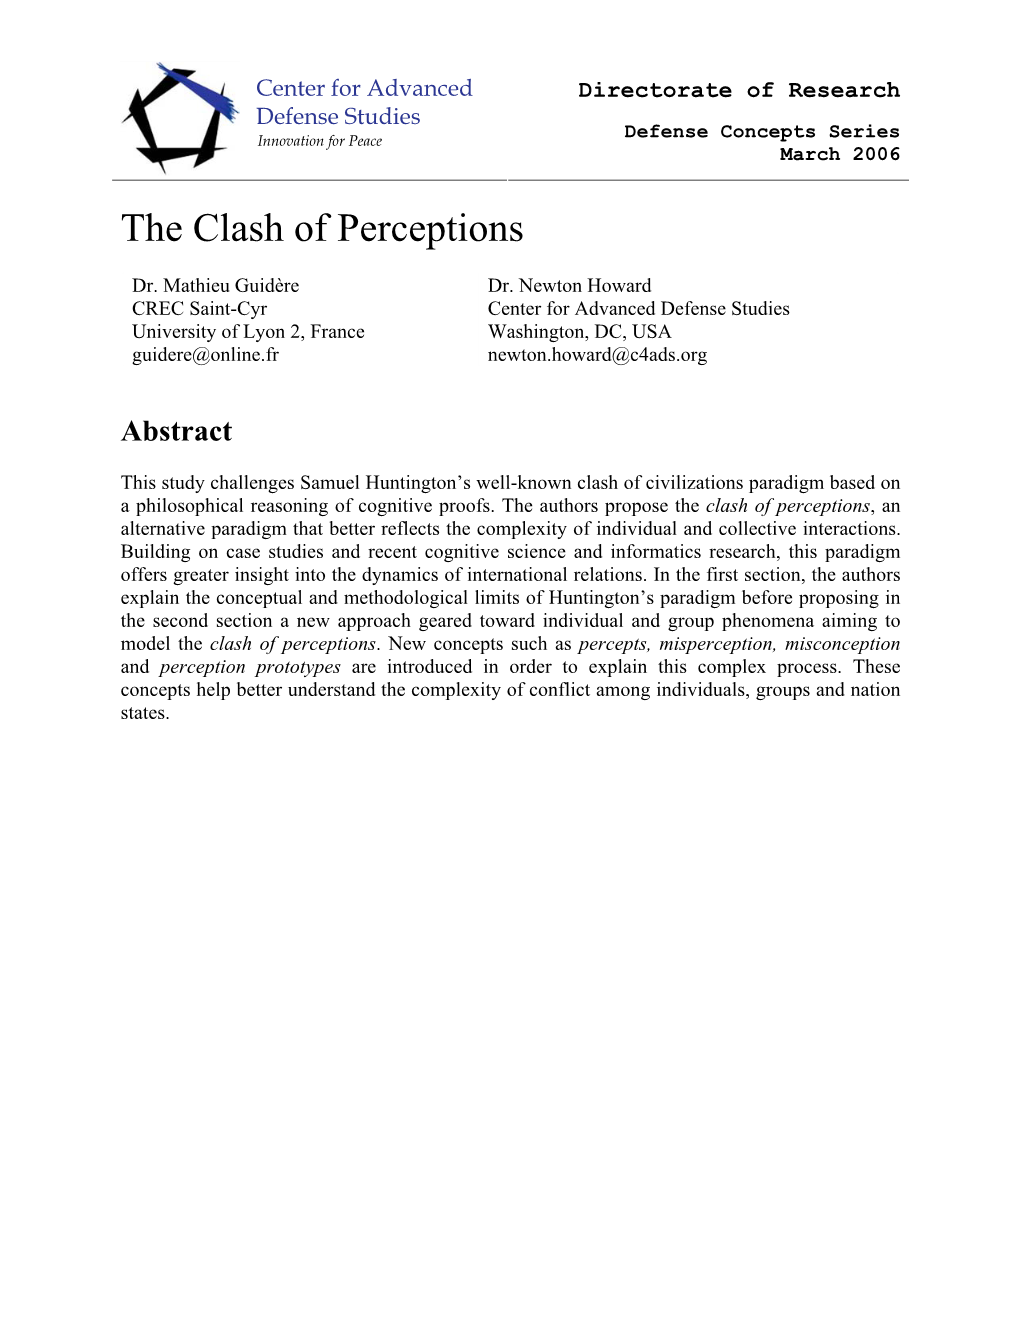 The Clash of Perceptions